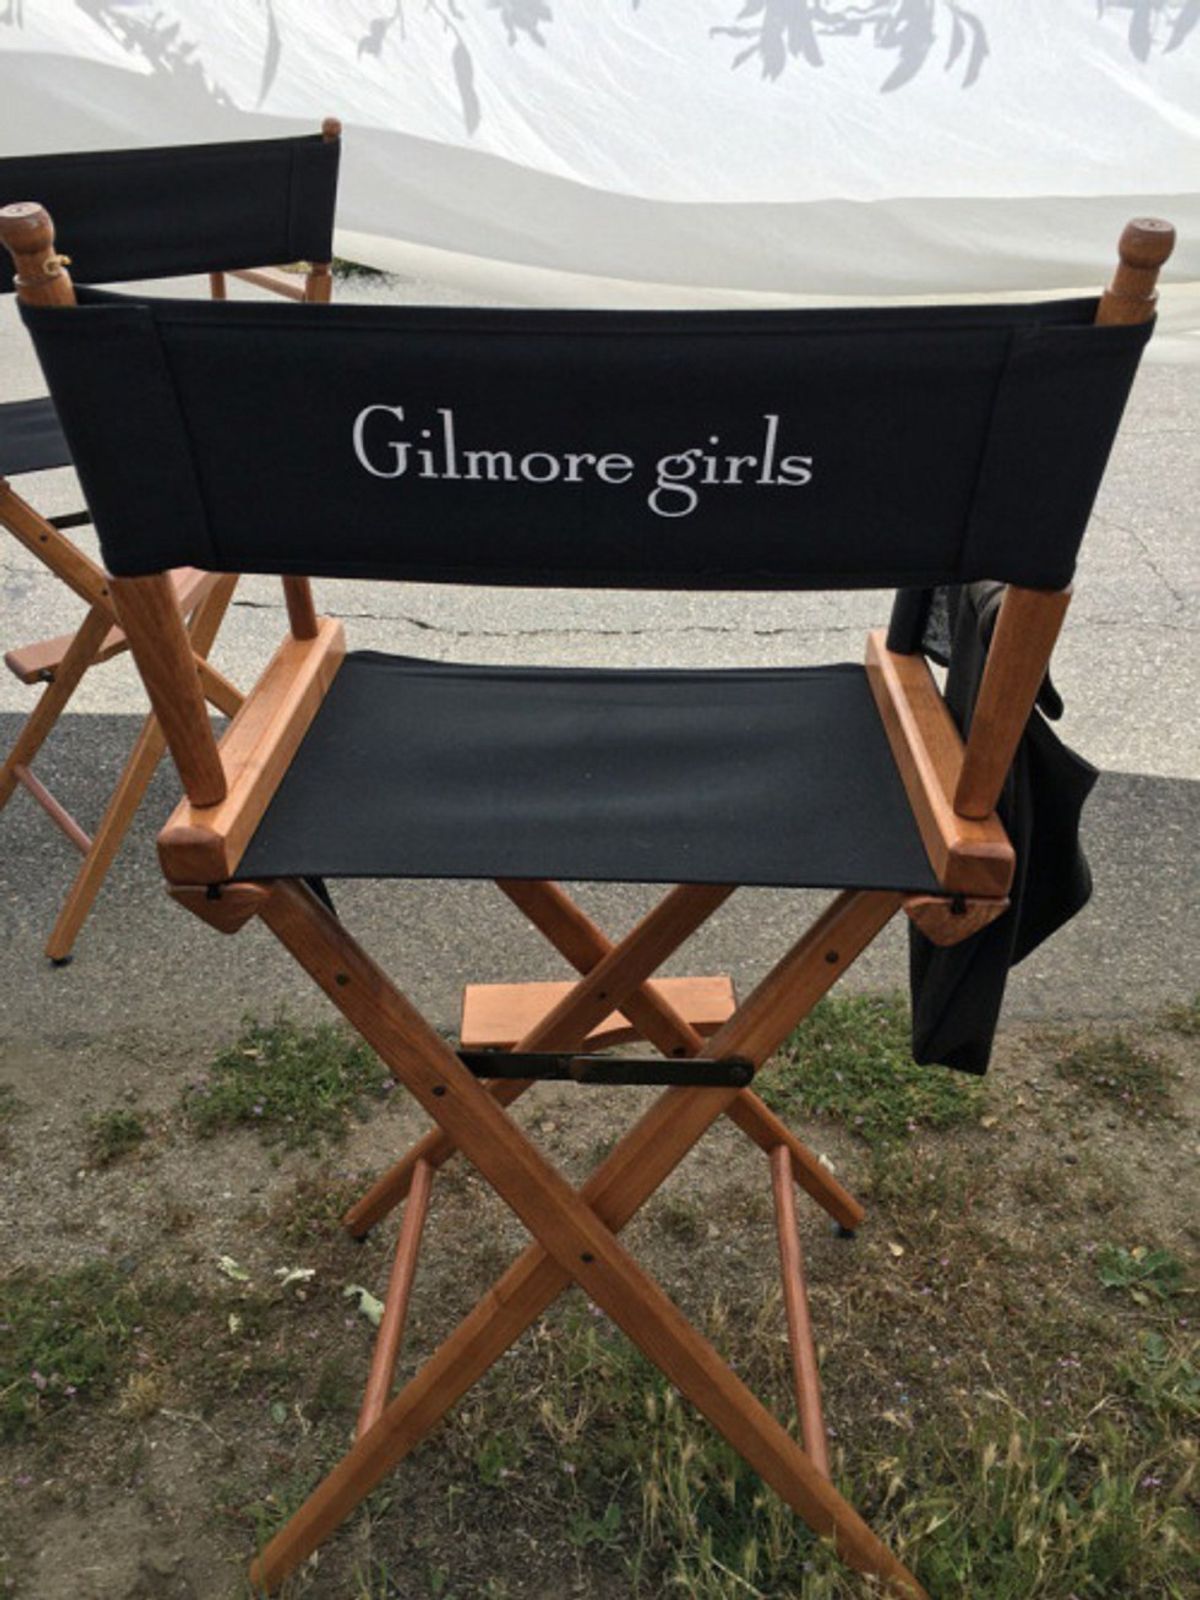 10 Reasons I Fell In Love With 'Gilmore Girls'